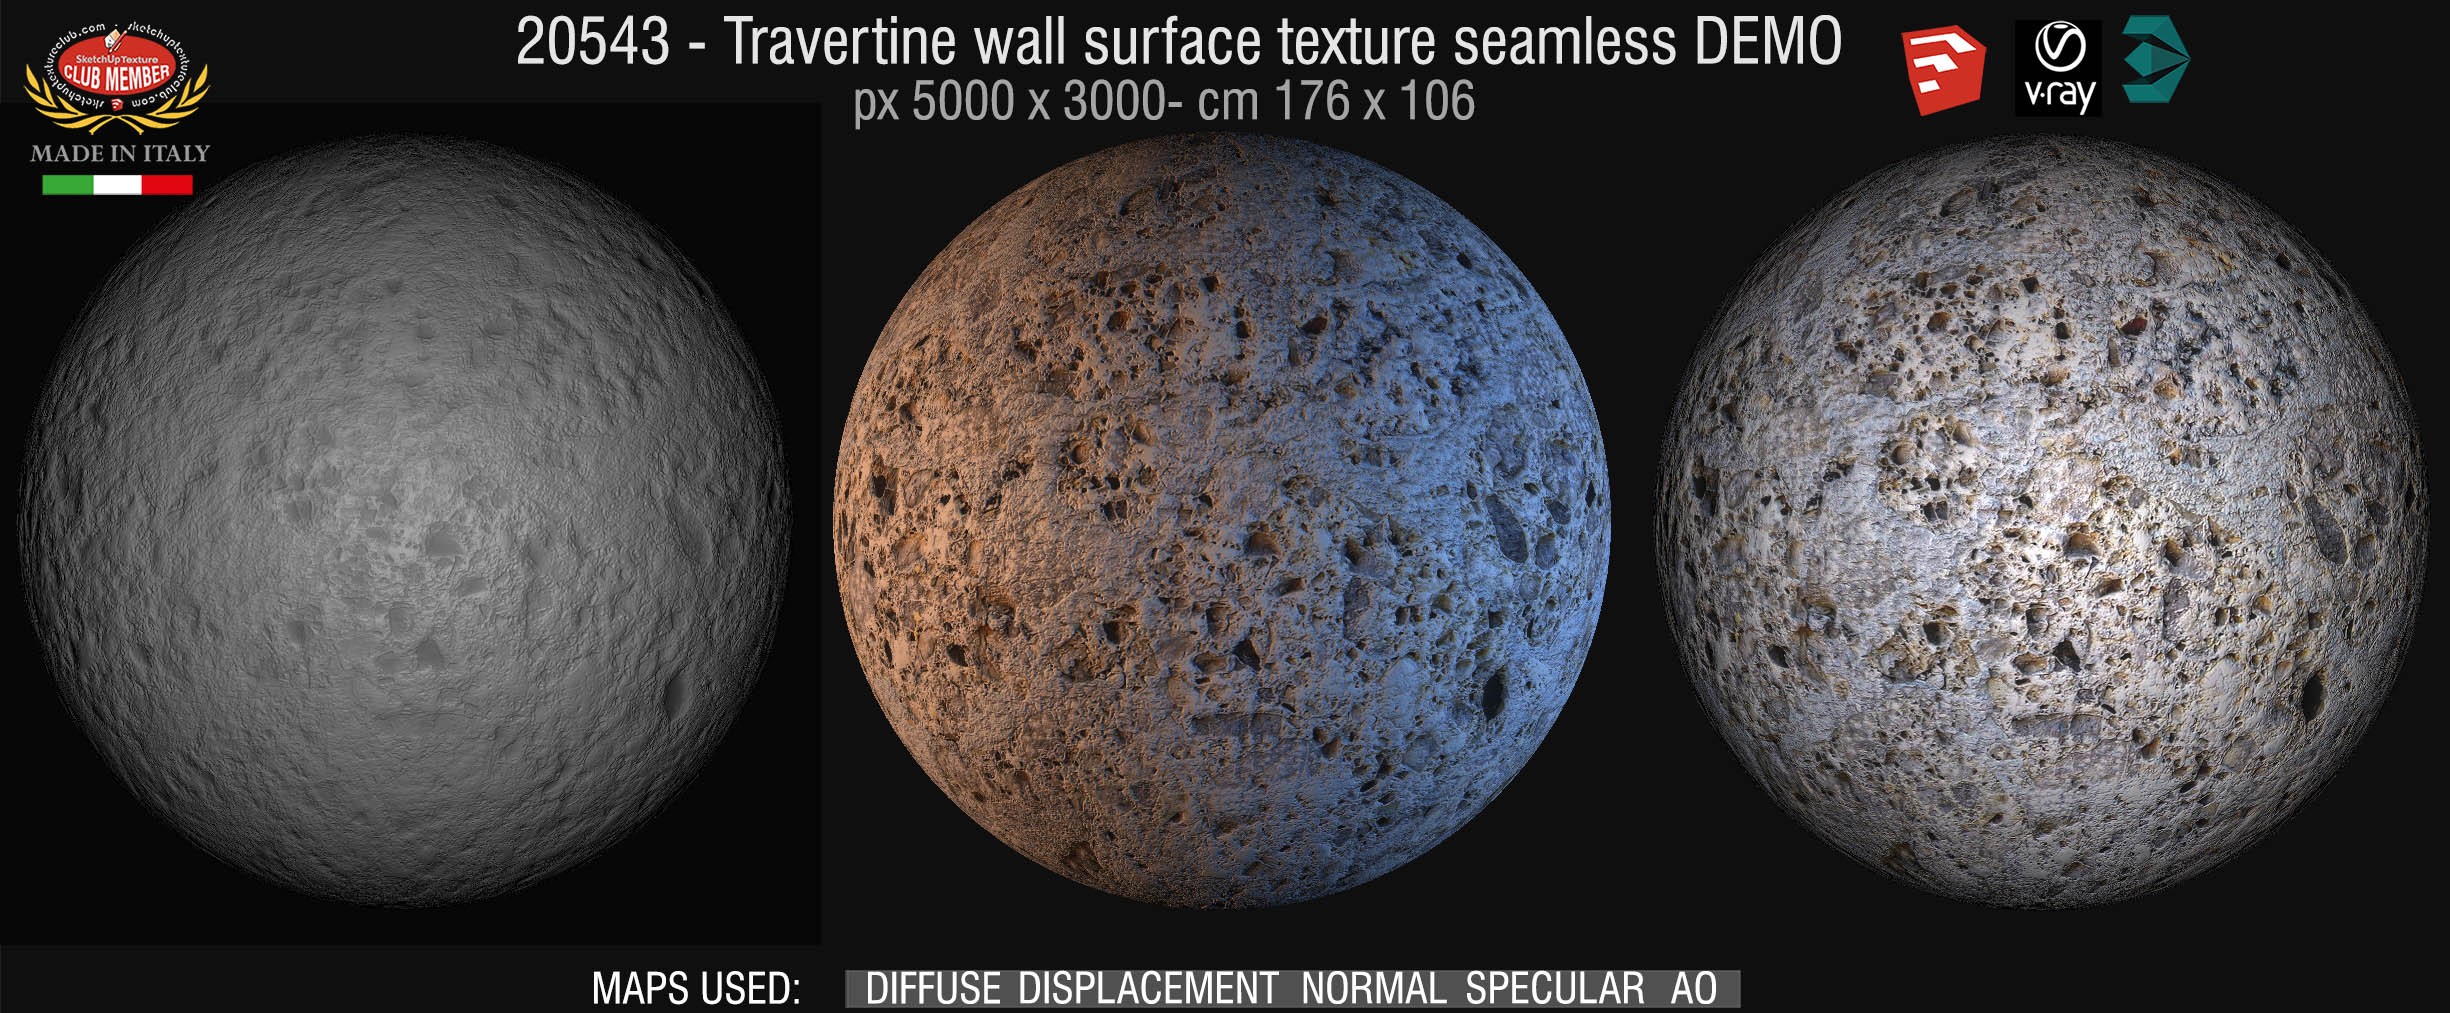 20543 Travertine wall surface texture + maps DEMO